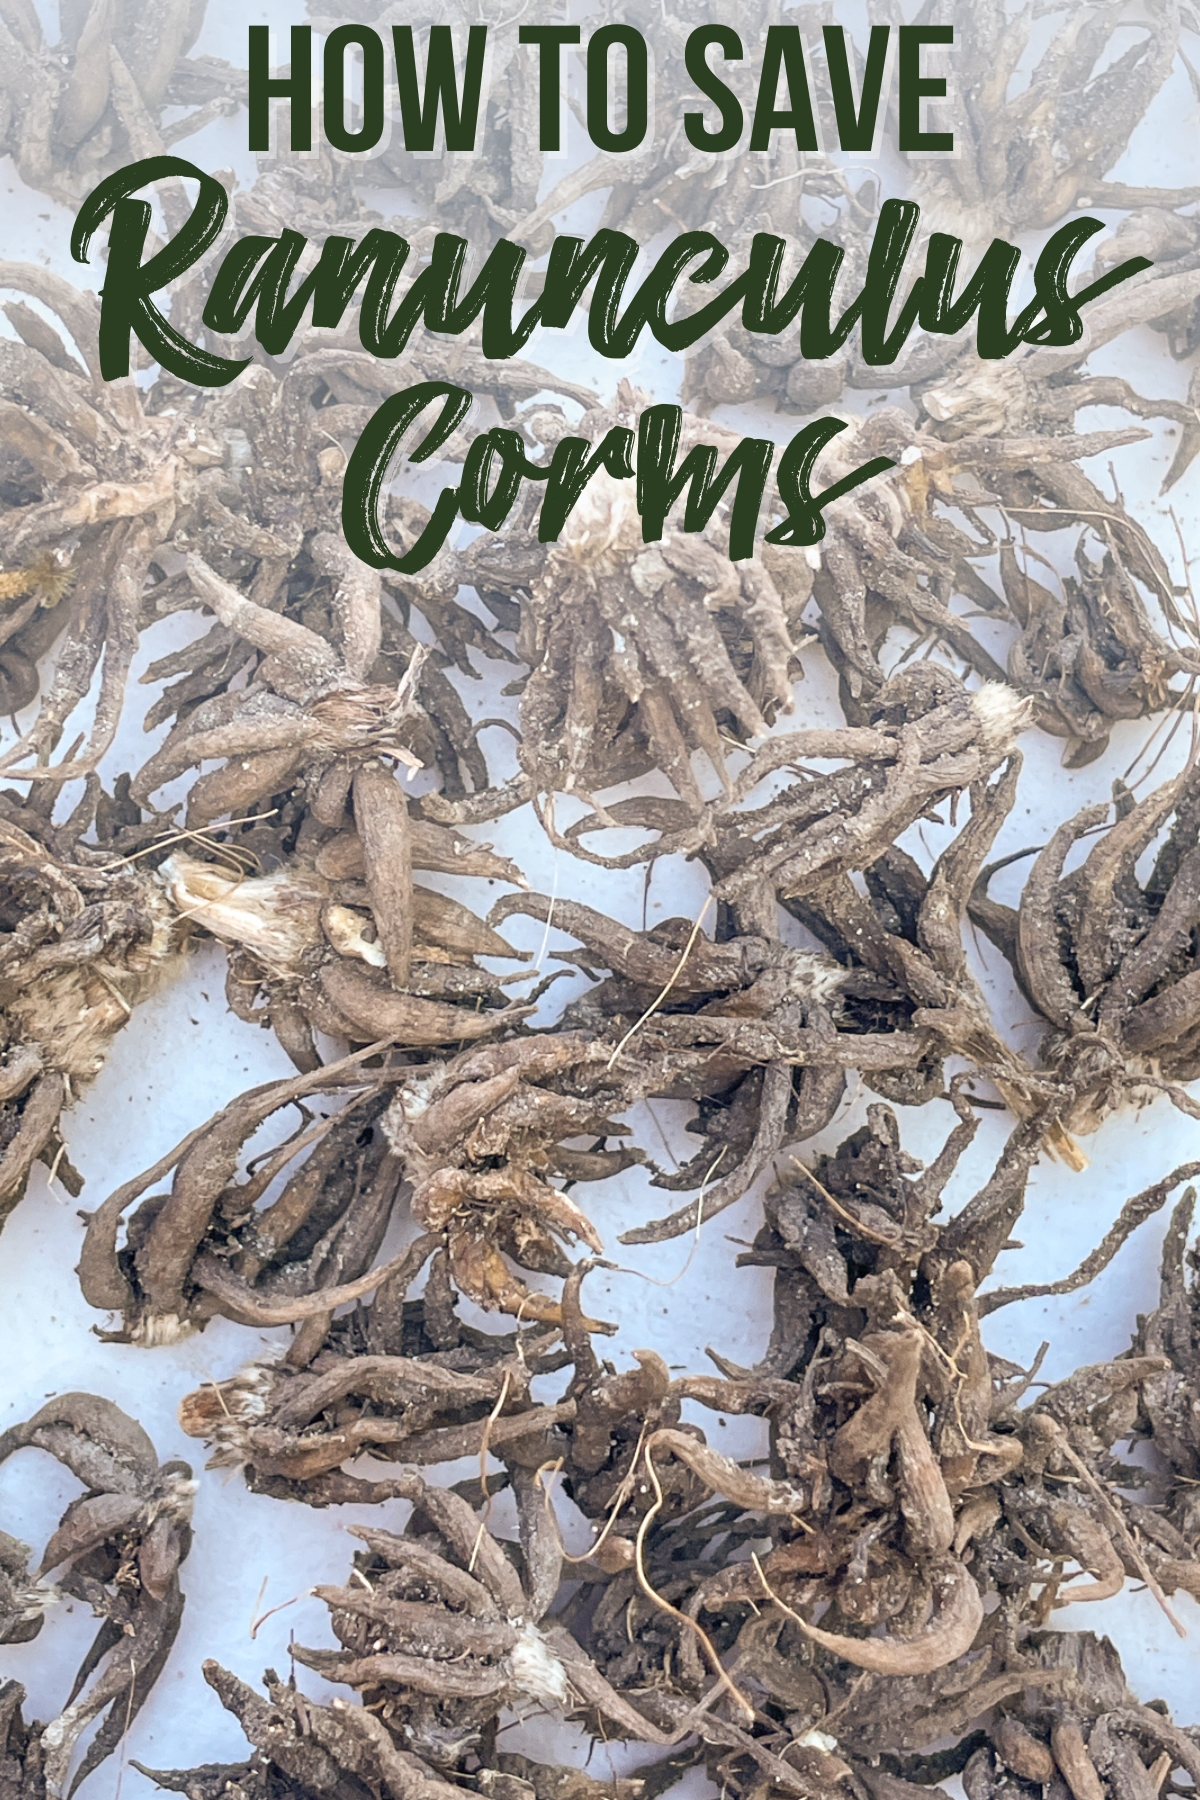 how to save ranunculus corms